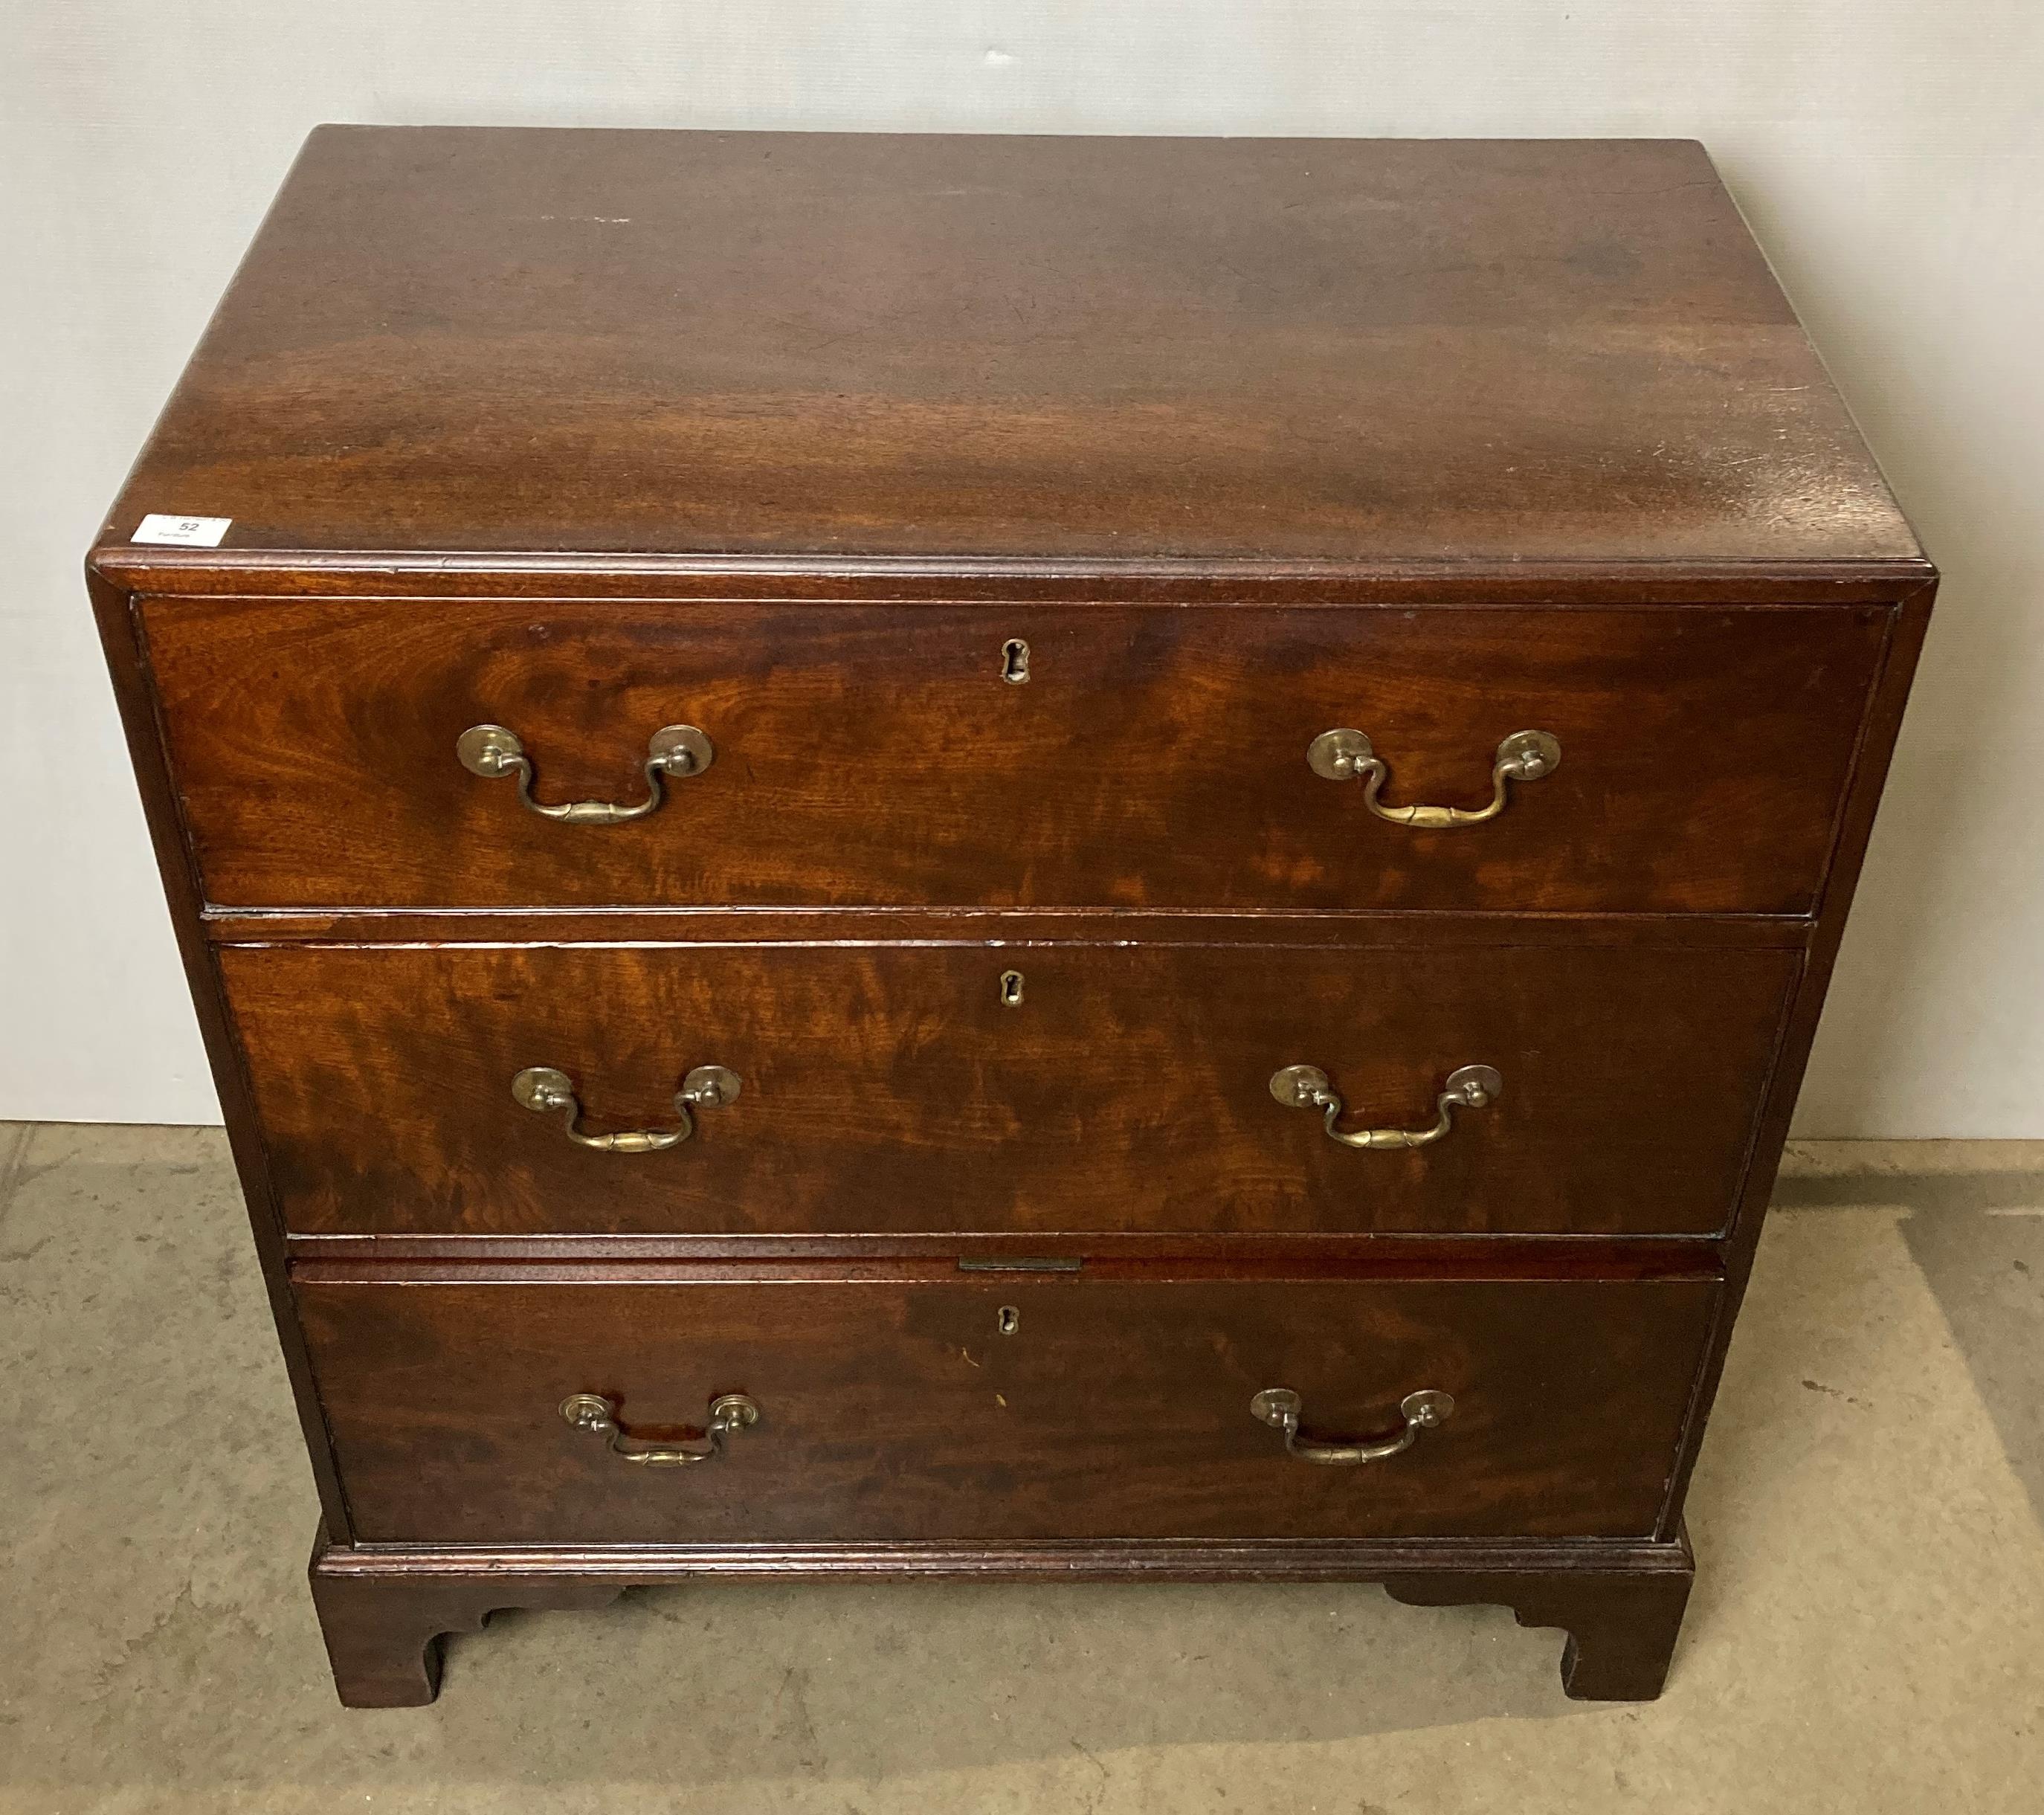 A mahogany Georgian-style three-drawer chest of drawers with metal drop handles, - Image 2 of 3